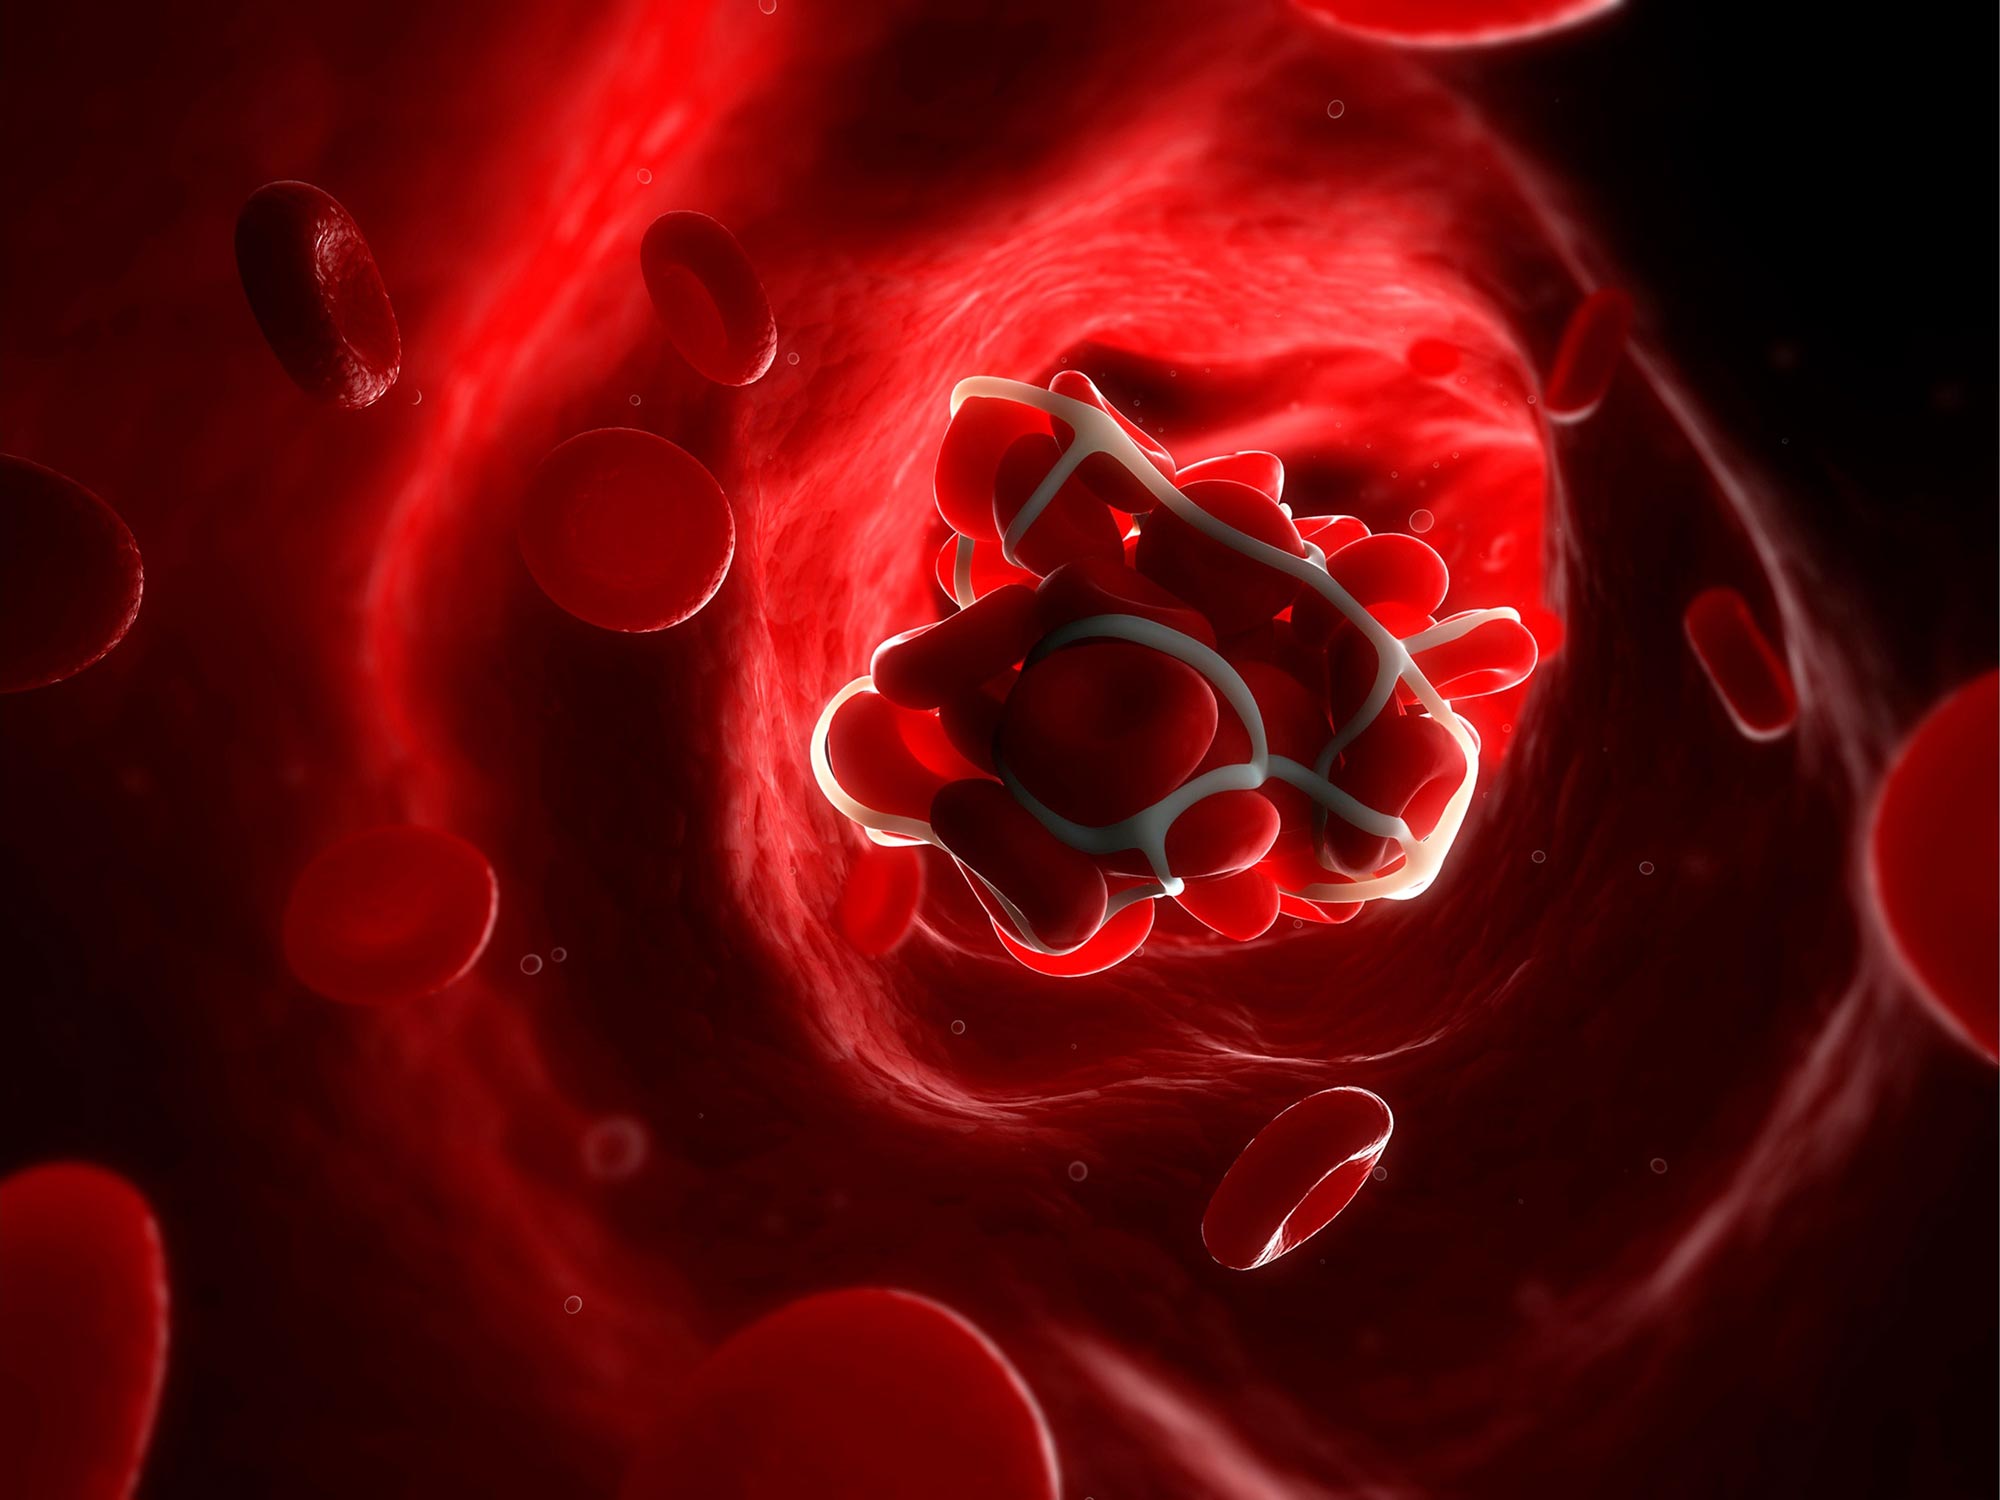 Overload Of Inflammatory Molecules “trapped” In Micro Blood Clots May